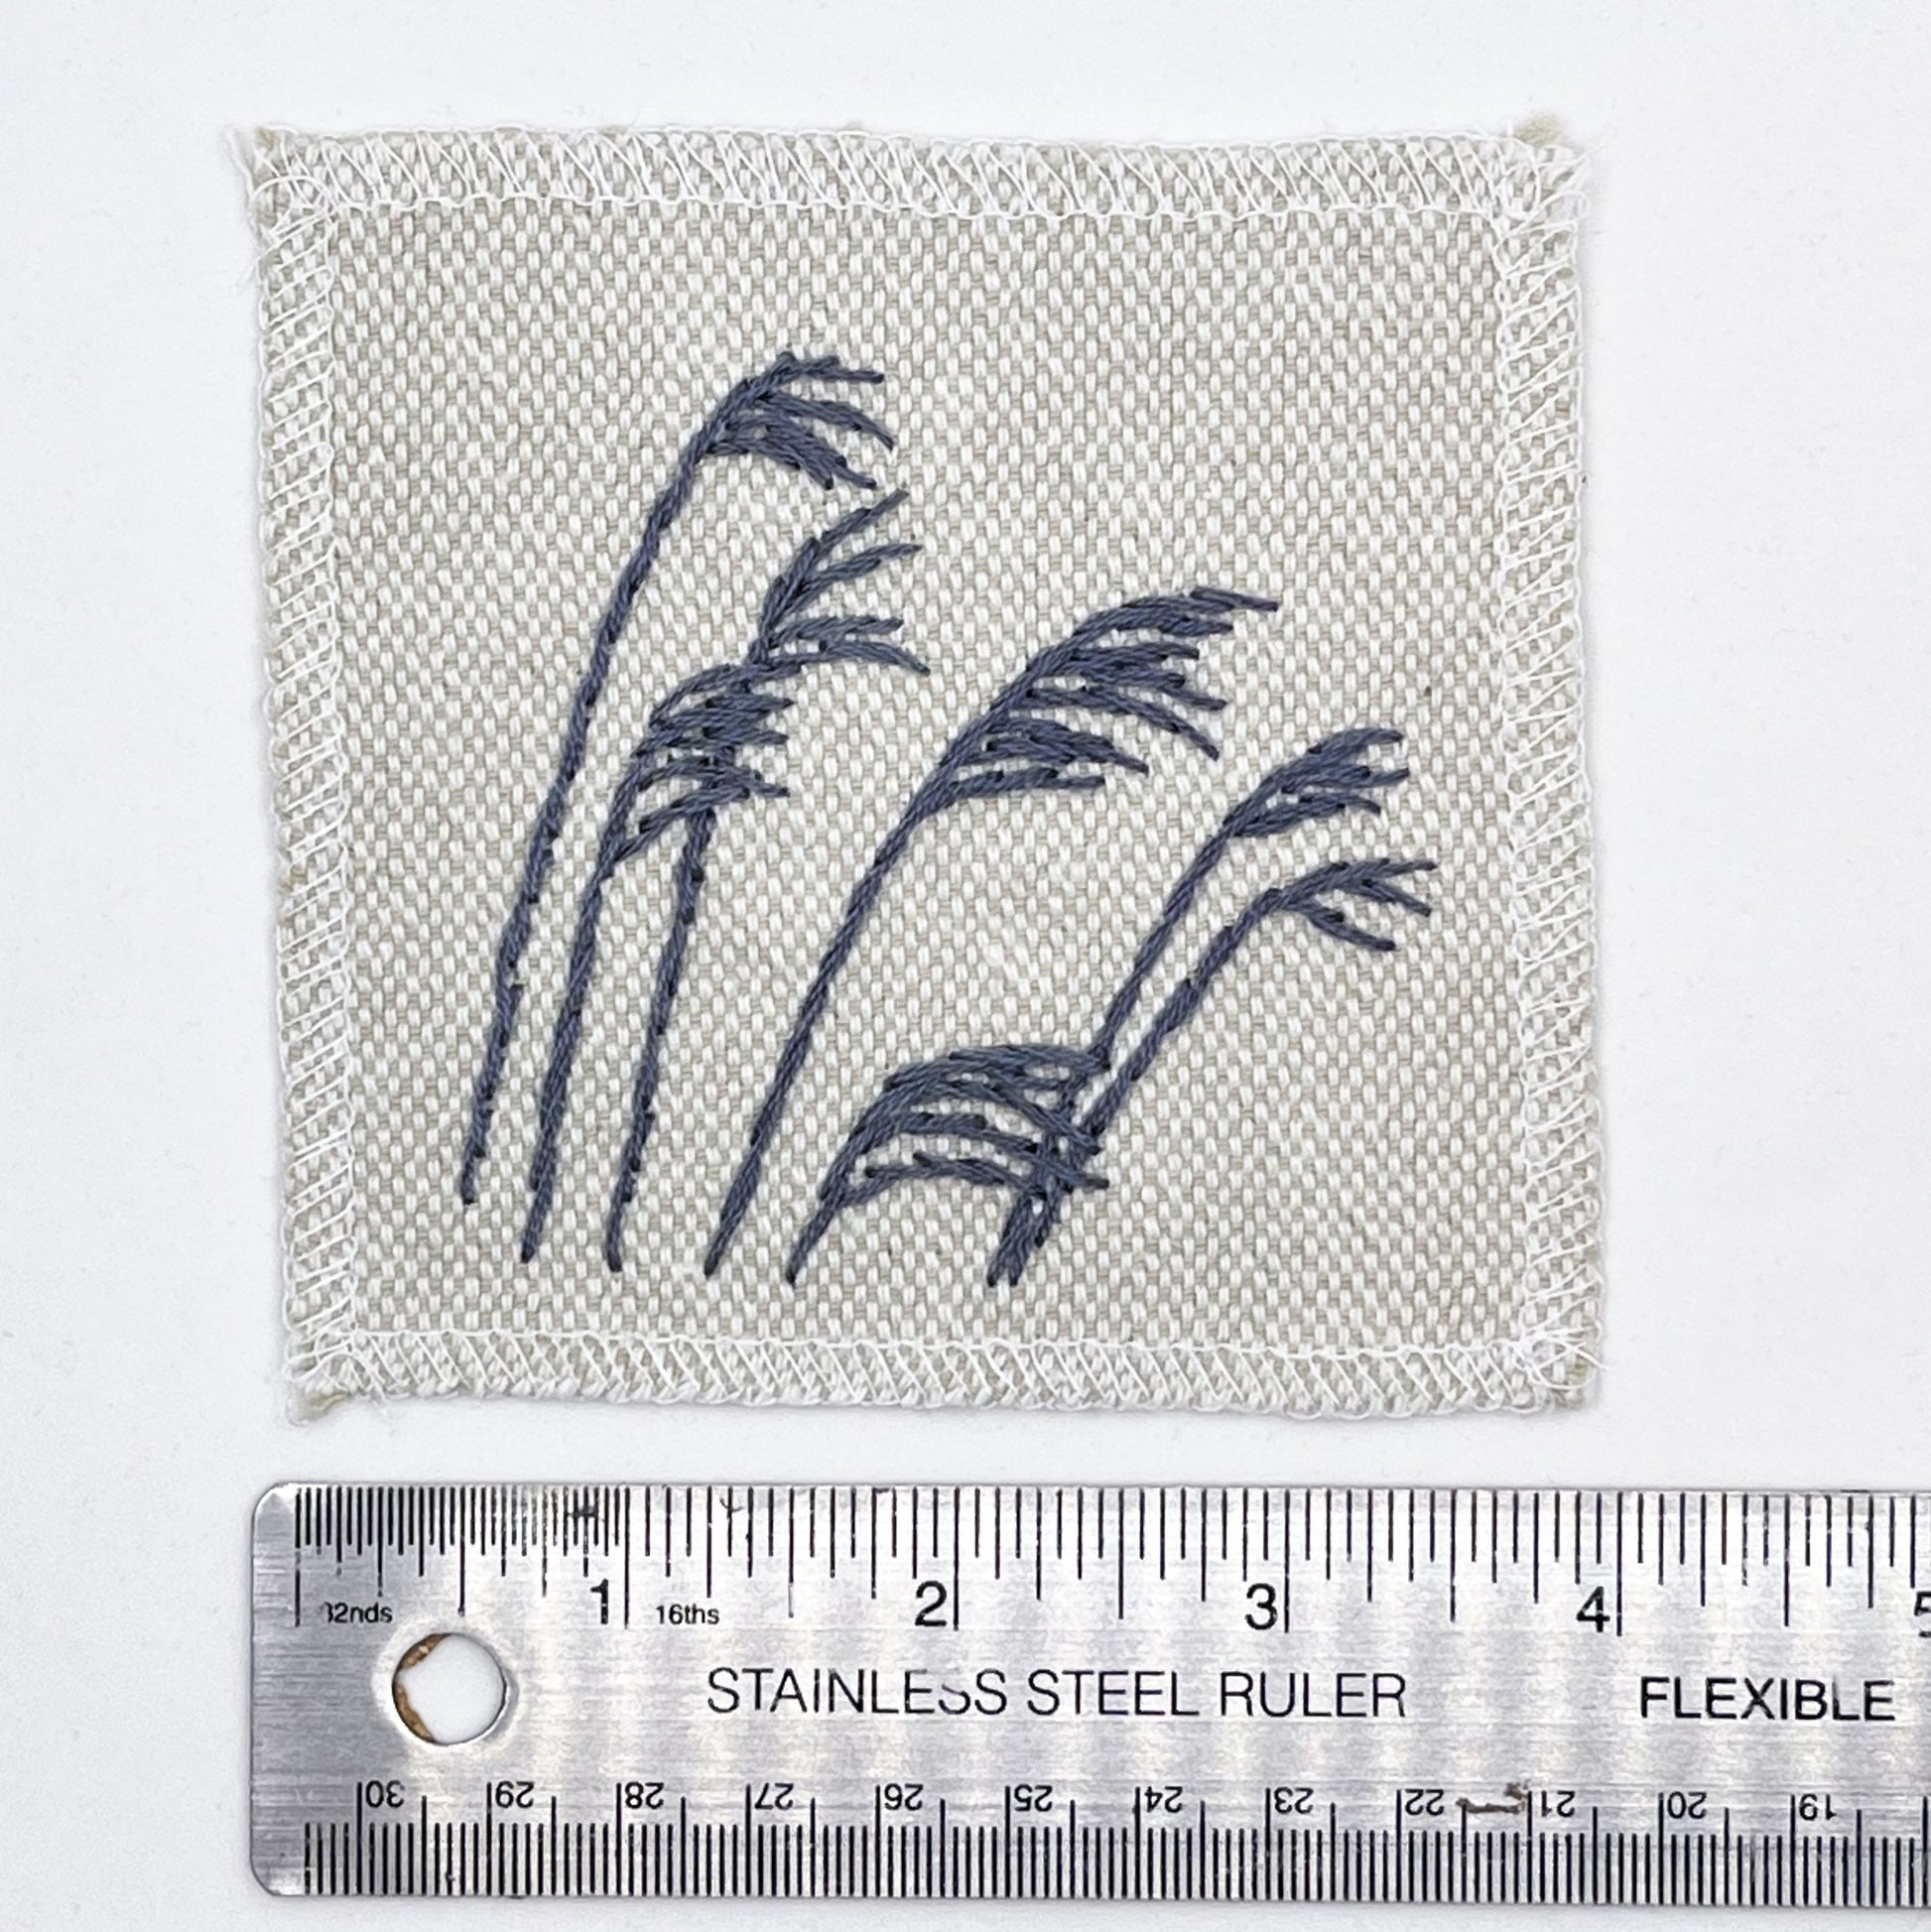 a natural colored square patch with stalks of wild grass stitched in grey thread with a stem stitch, placed next to a metal ruler to show a width of 4 inches, on a white background